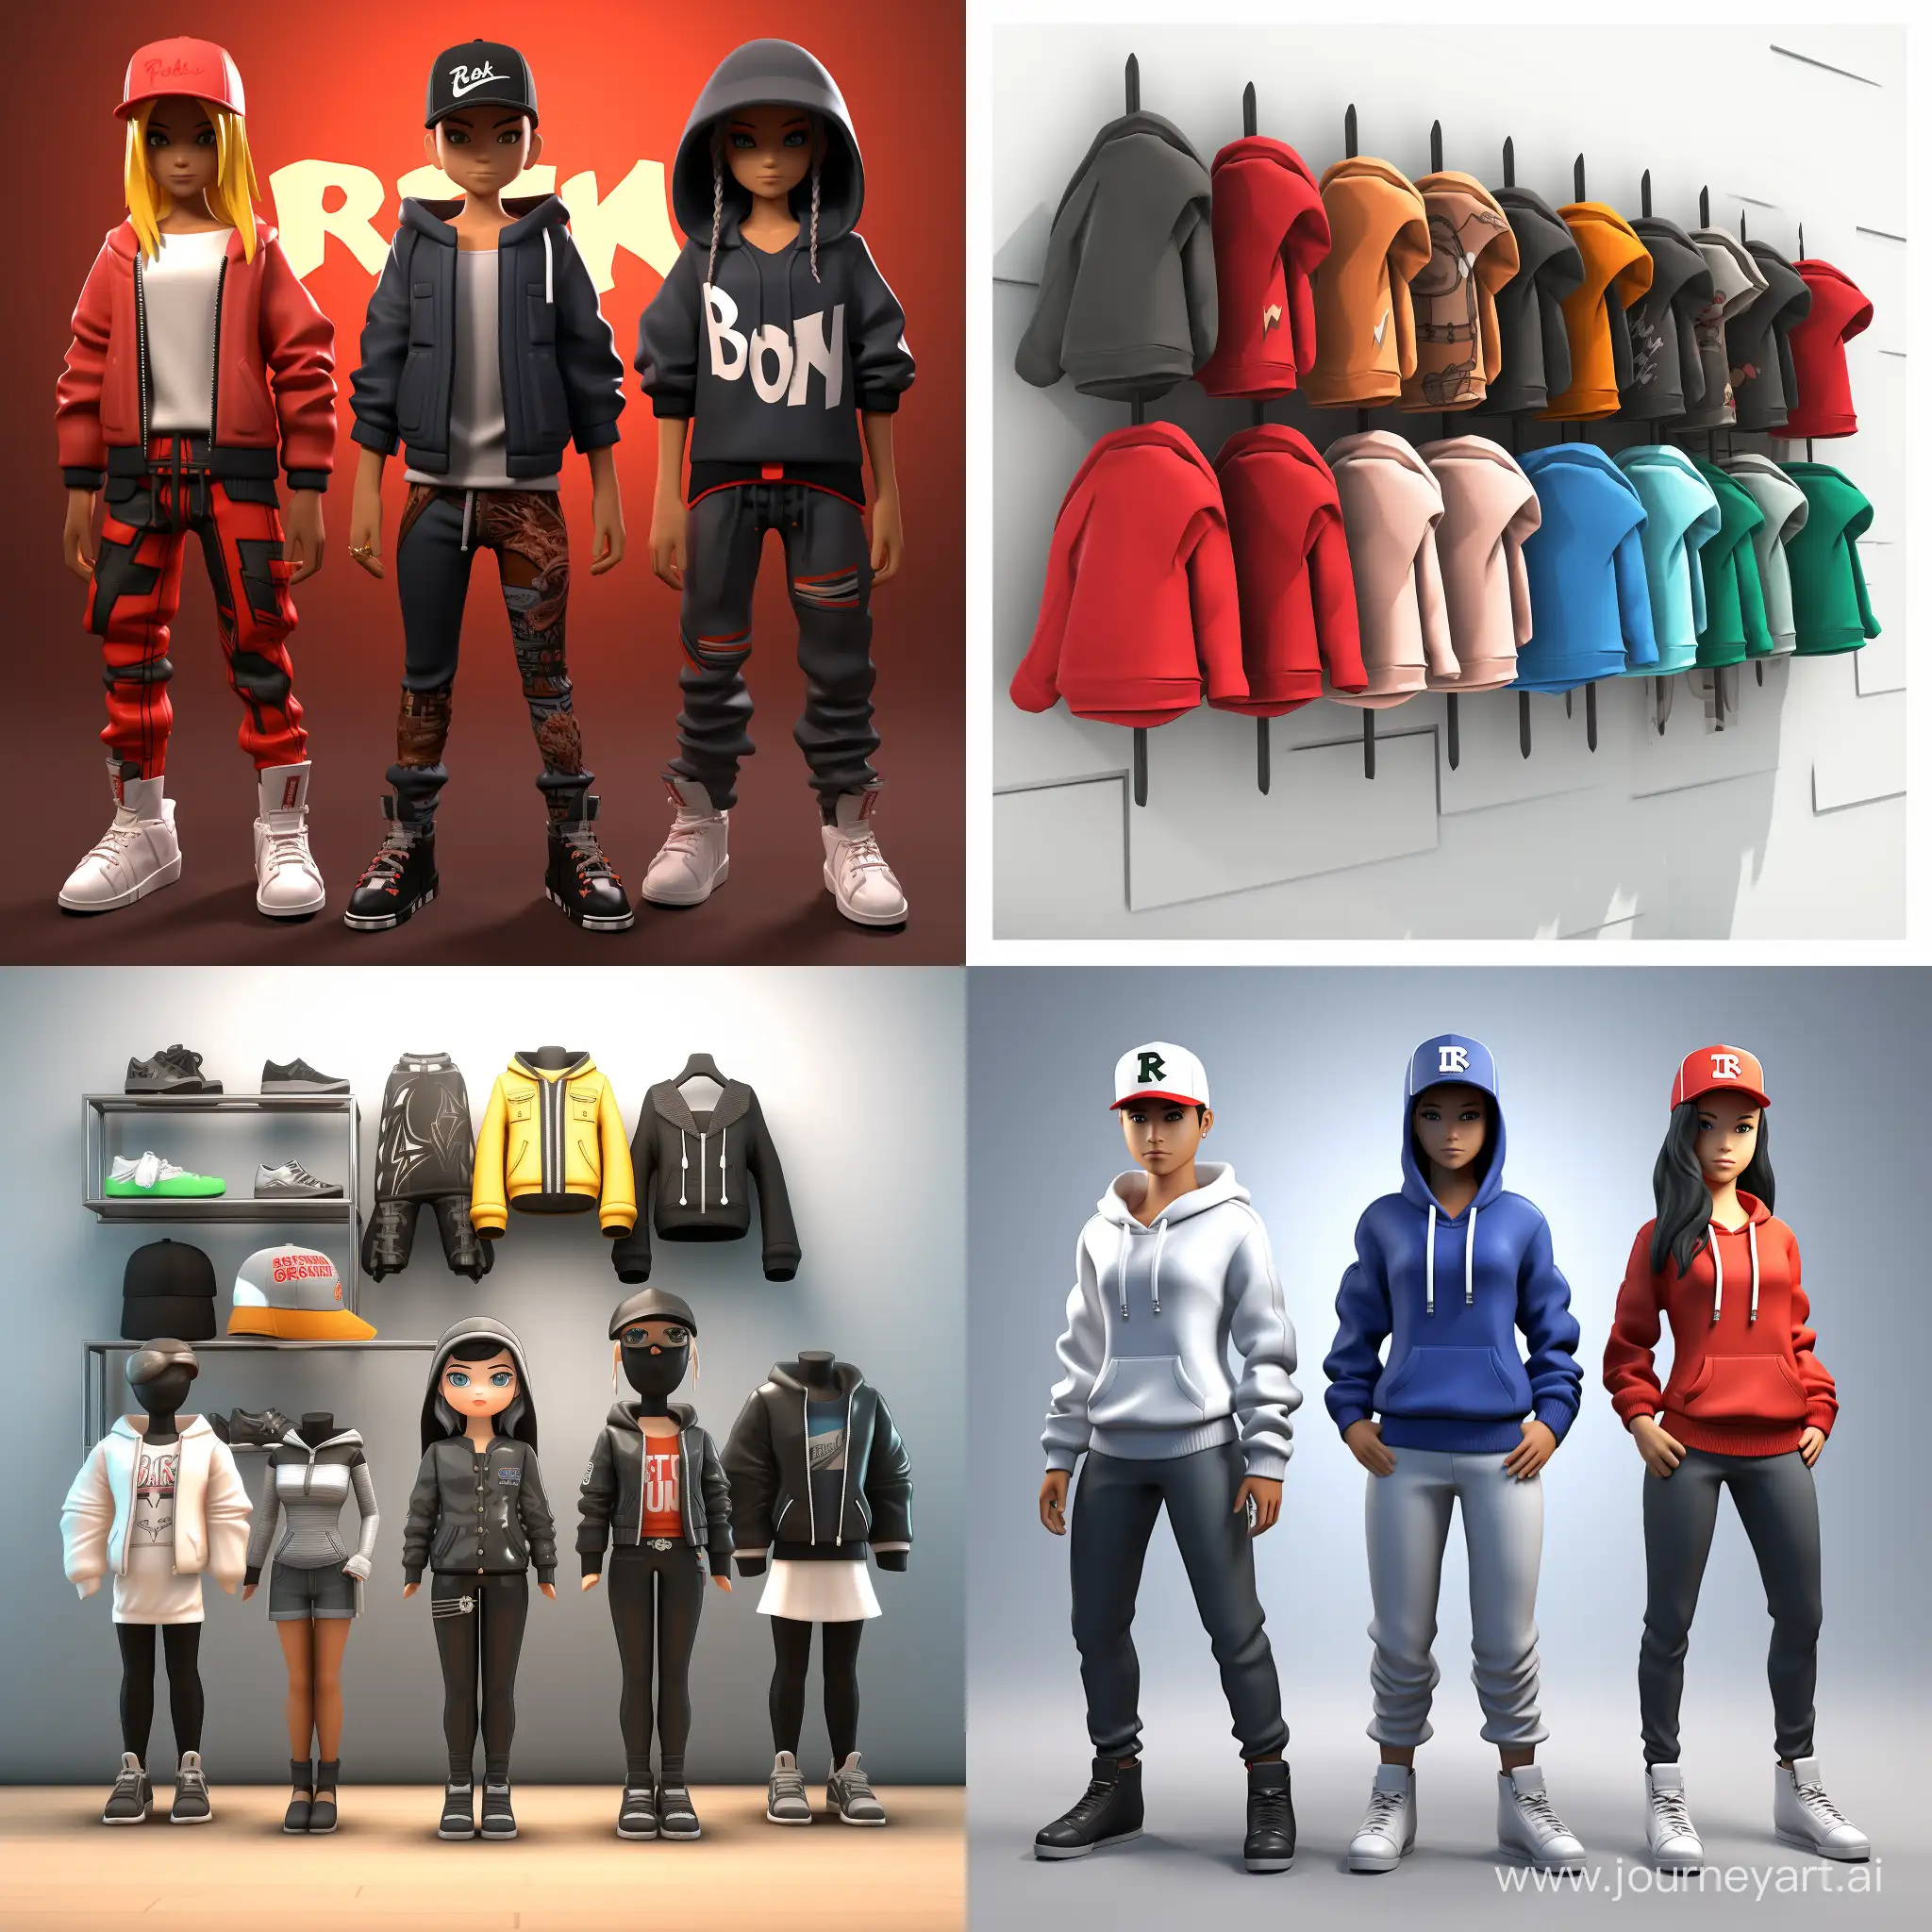 Custom-Roblox-Clothes-Collection-Diverse-Styles-and-Options-AR-11-No-7069